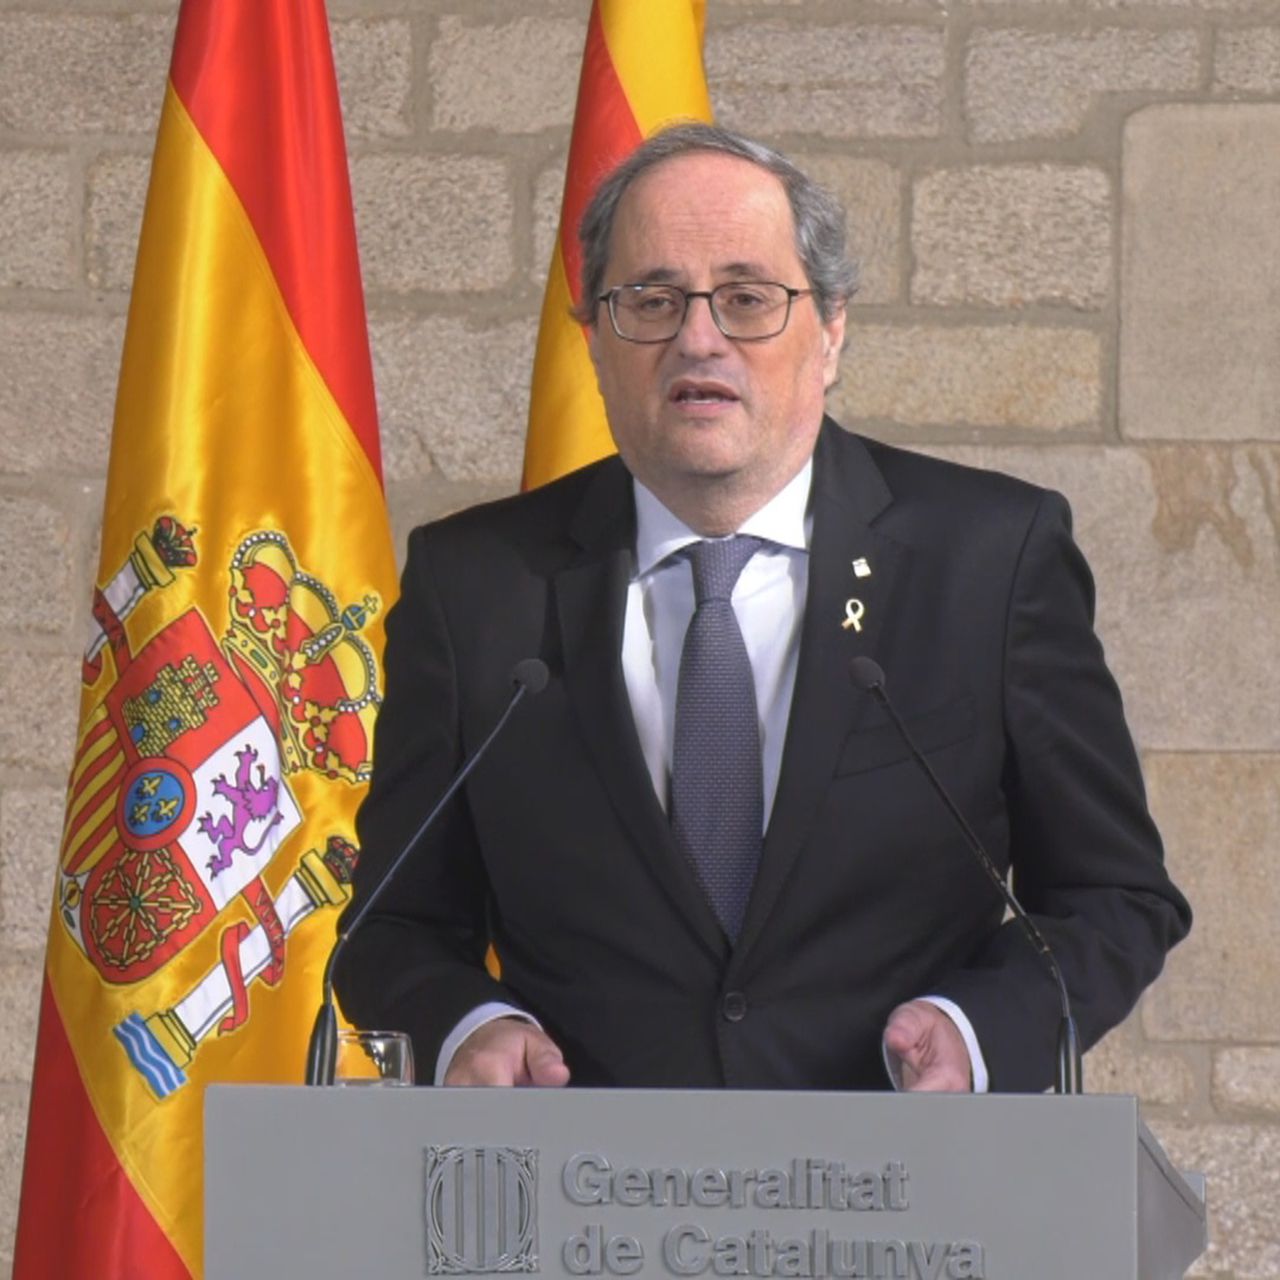 “Catalonia will be independent,” says Quim Torra , Image via Catalan News